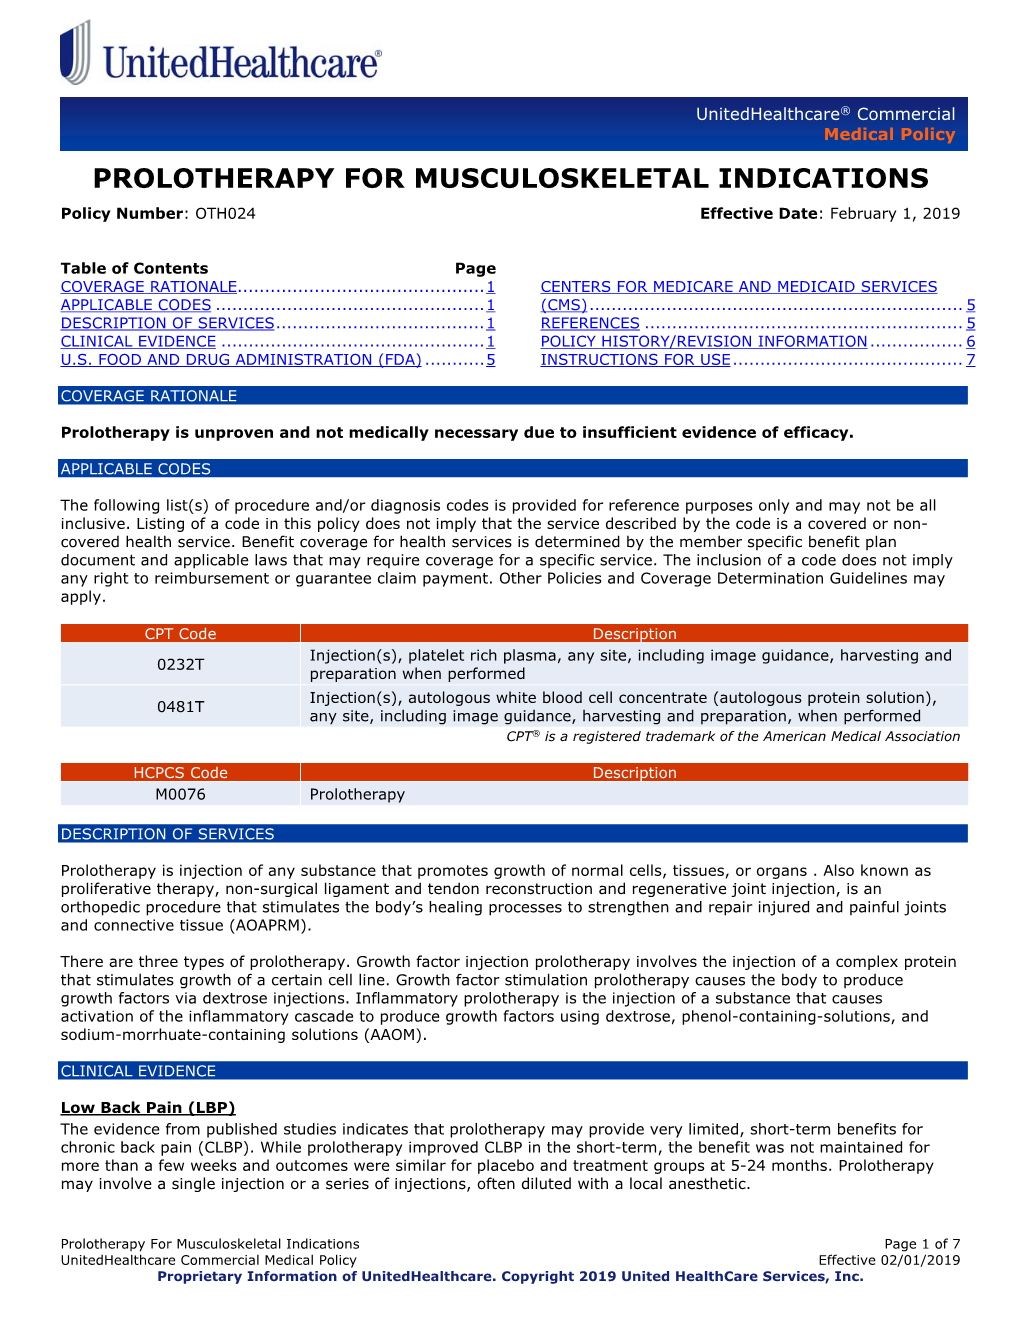 PROLOTHERAPY for MUSCULOSKELETAL INDICATIONS Policy Number: OTH024 Effective Date: February 1, 2019